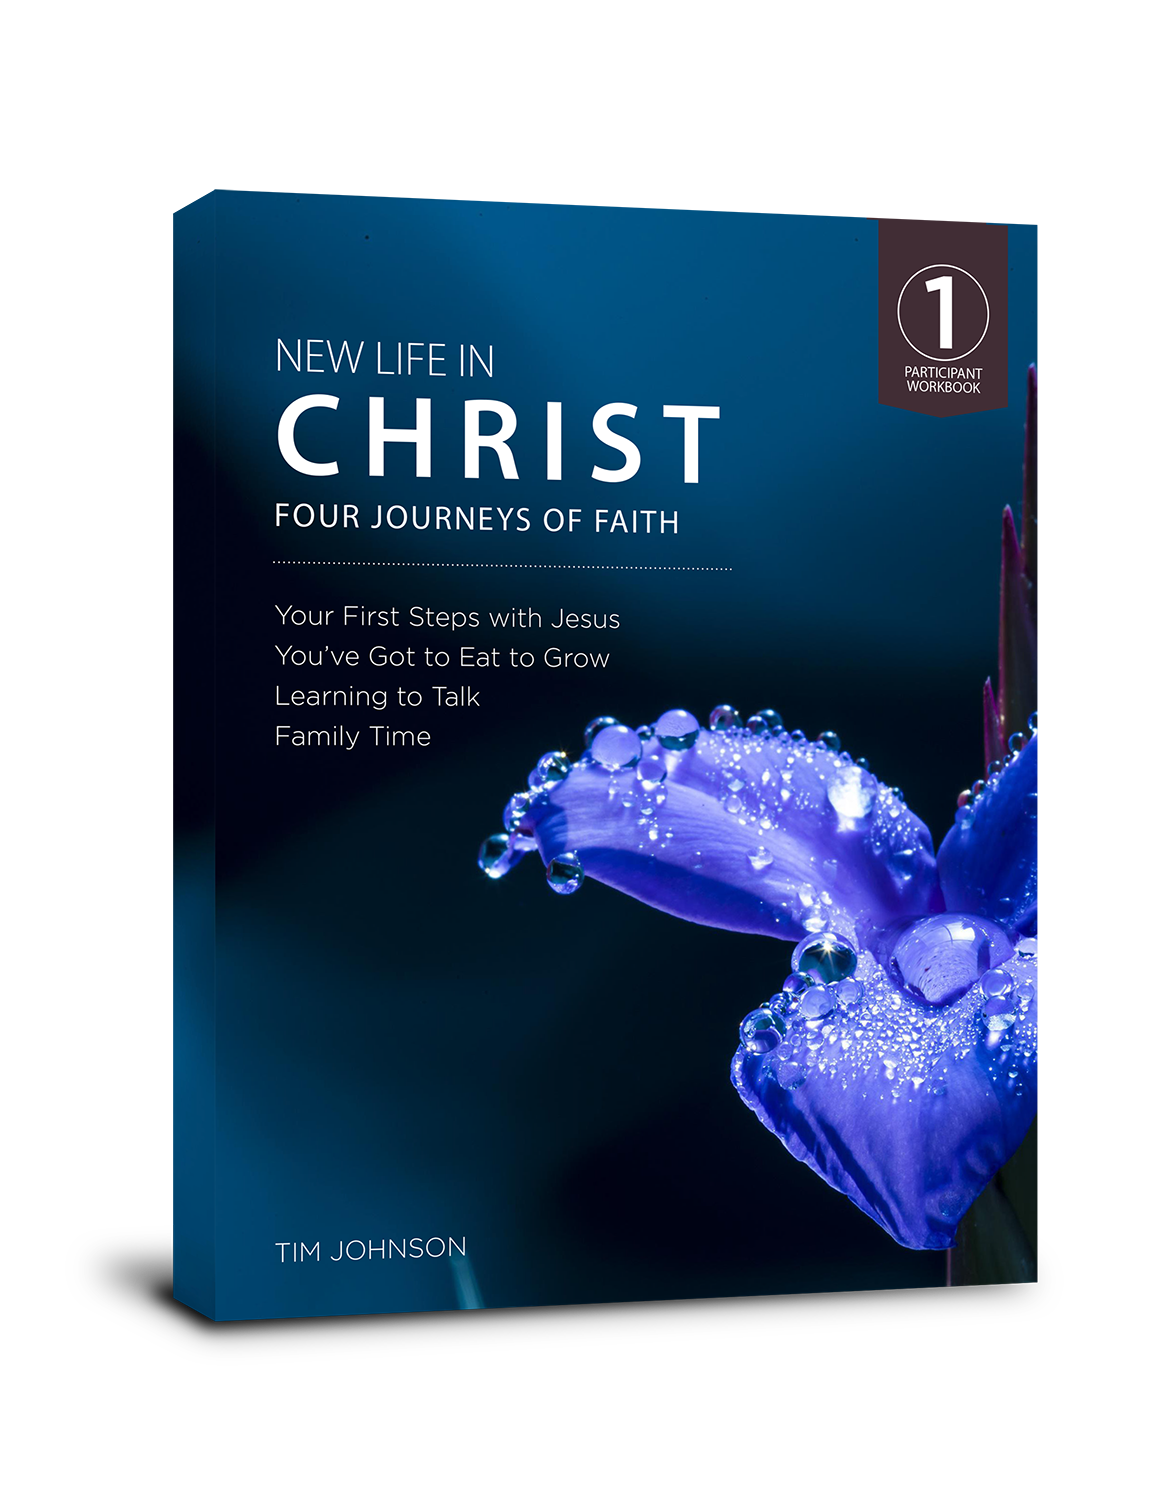 New Life in Christ Book Cover_sm.png